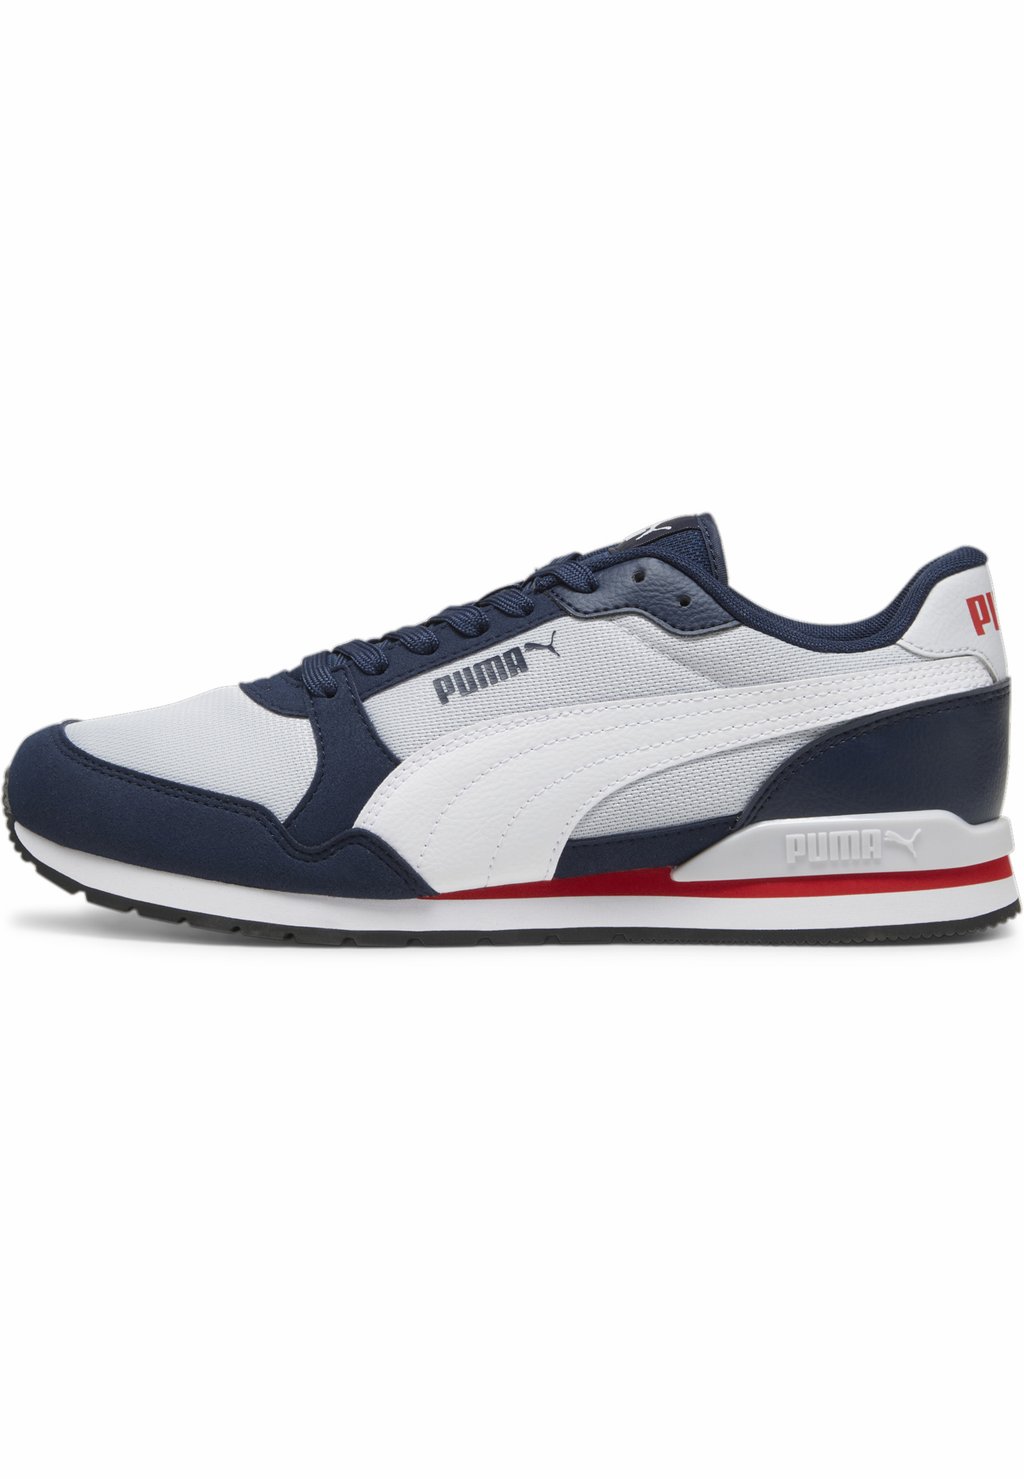 Низкие кроссовки Runner Puma, цвет silver mist white club navy for all time red black cornwell patricia red mist